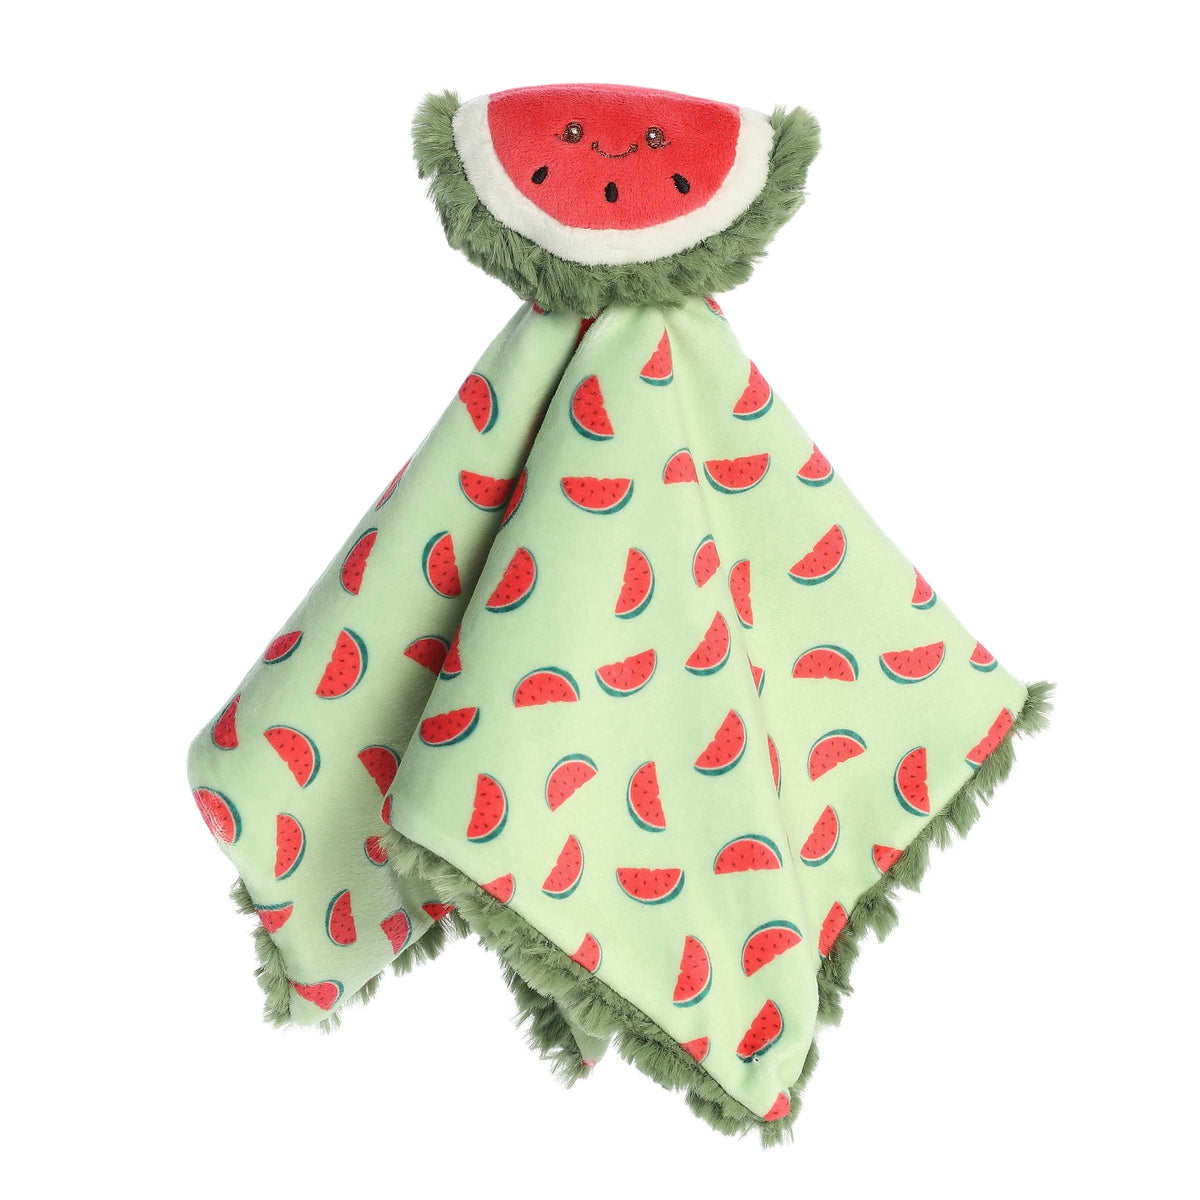 Cozy Watermelon Plush with a red and white body, attached baby blanket with fruit design and soft green fur on the back.